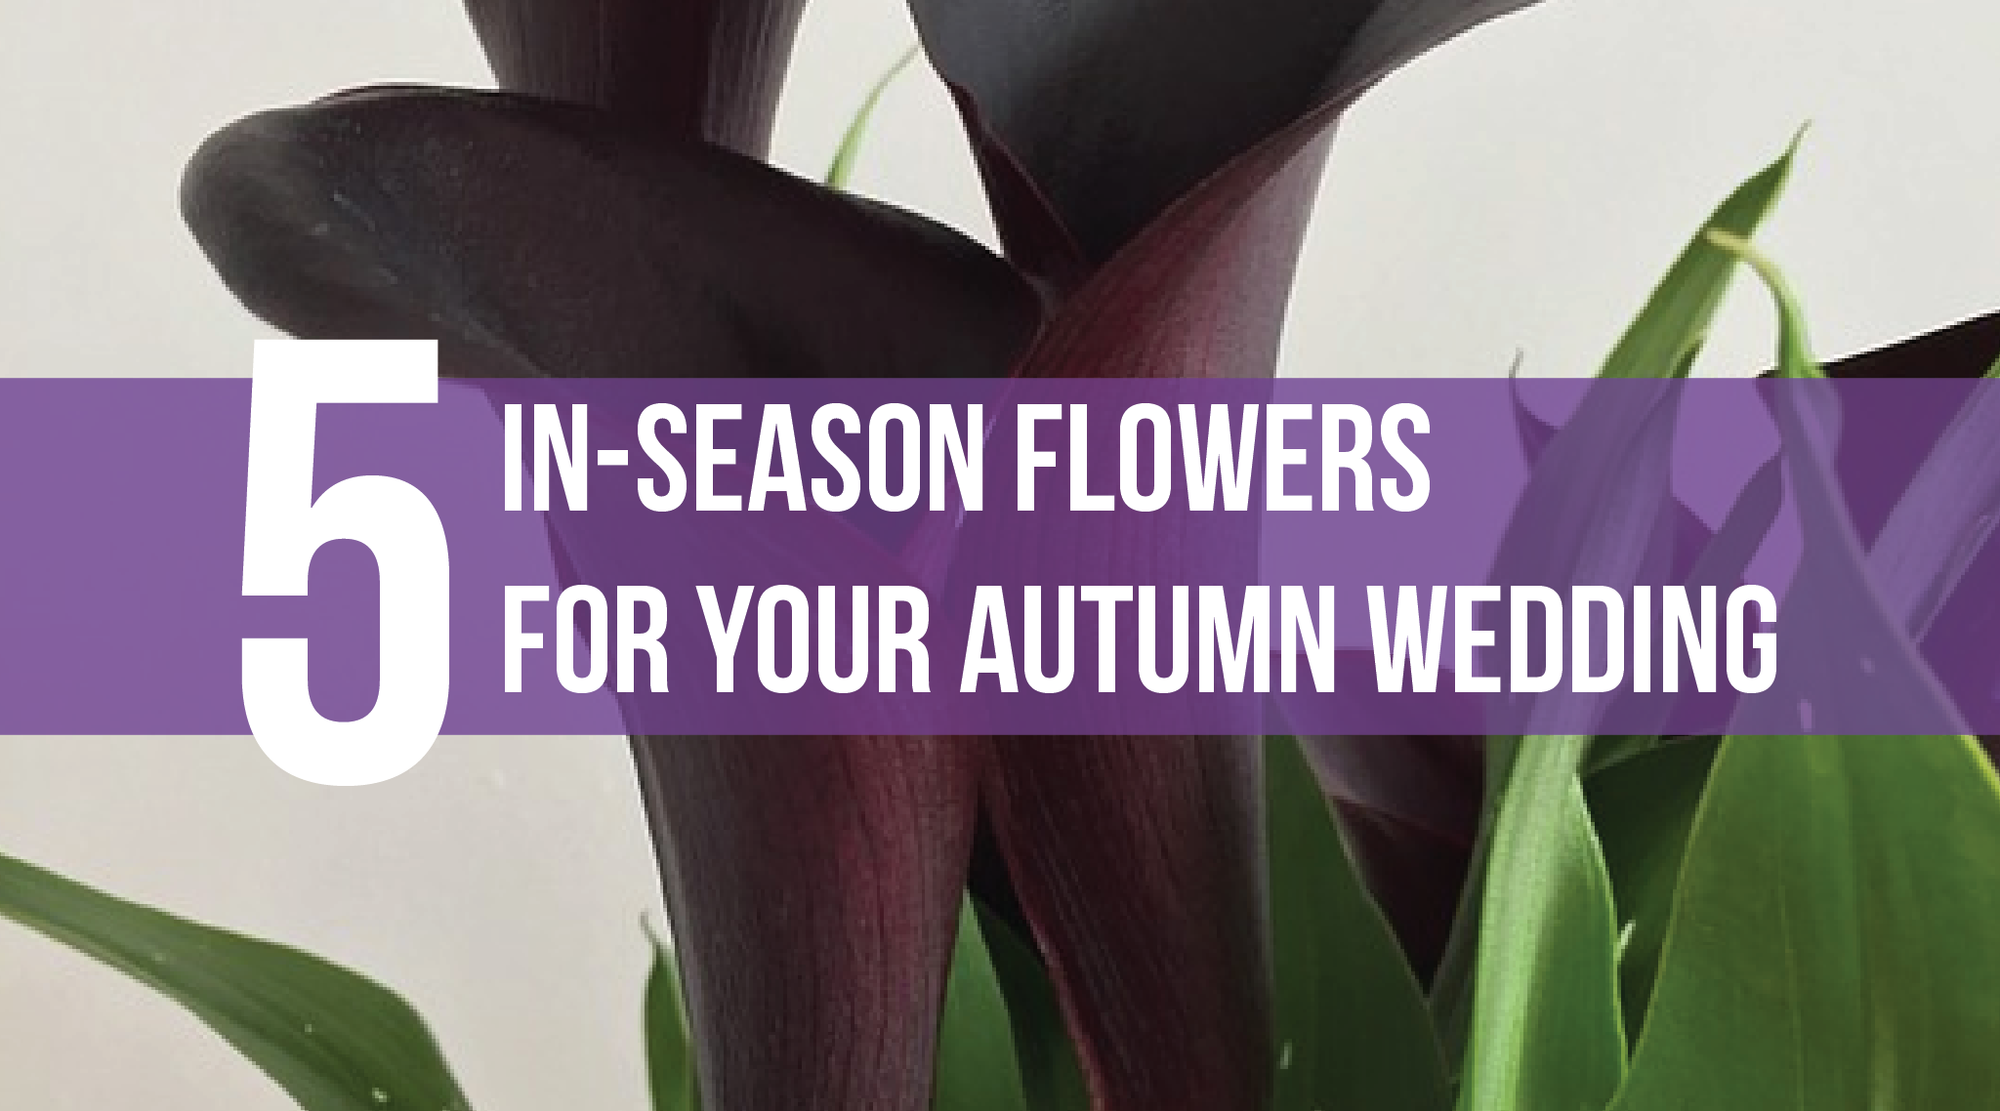 5 In-Season Flowers for Your Autumn Wedding